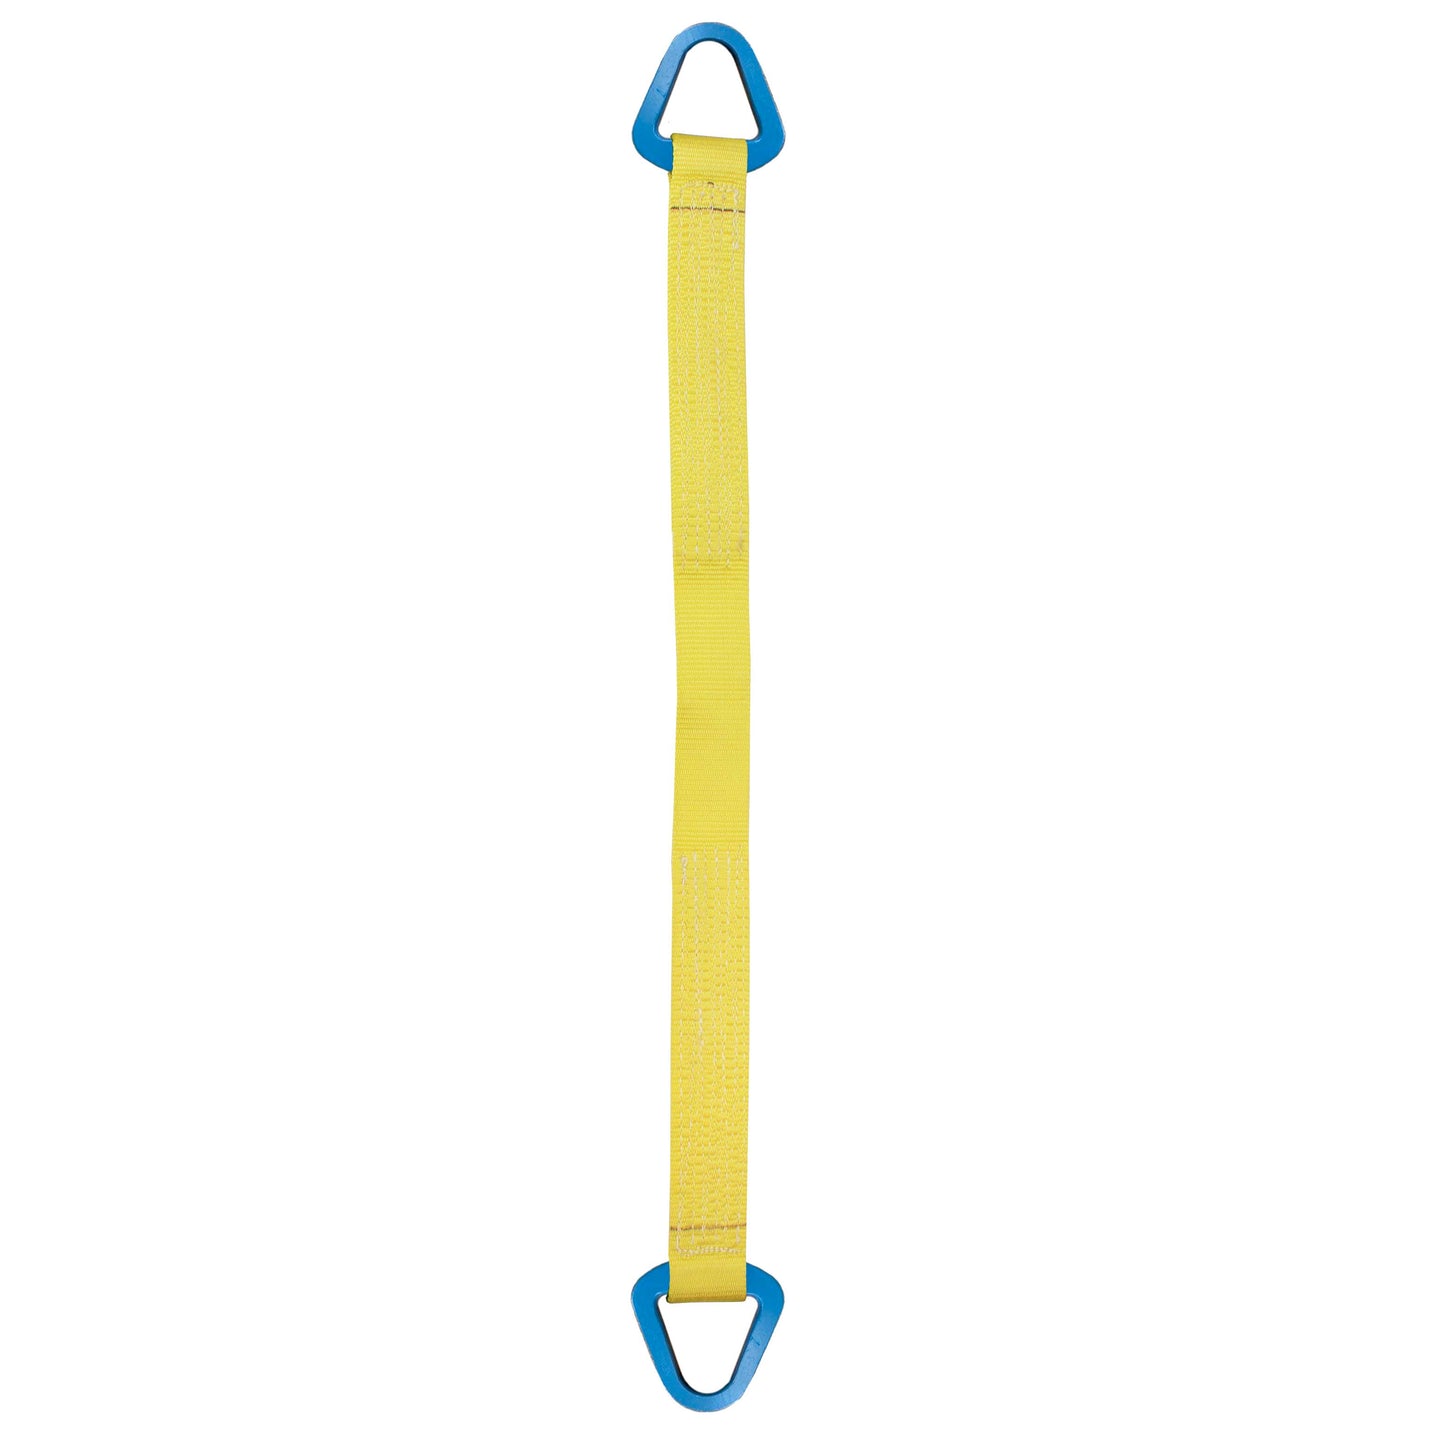 Nylon Lifting Sling Triangle 3 inch x 20 foot 2ply image 1 of 2